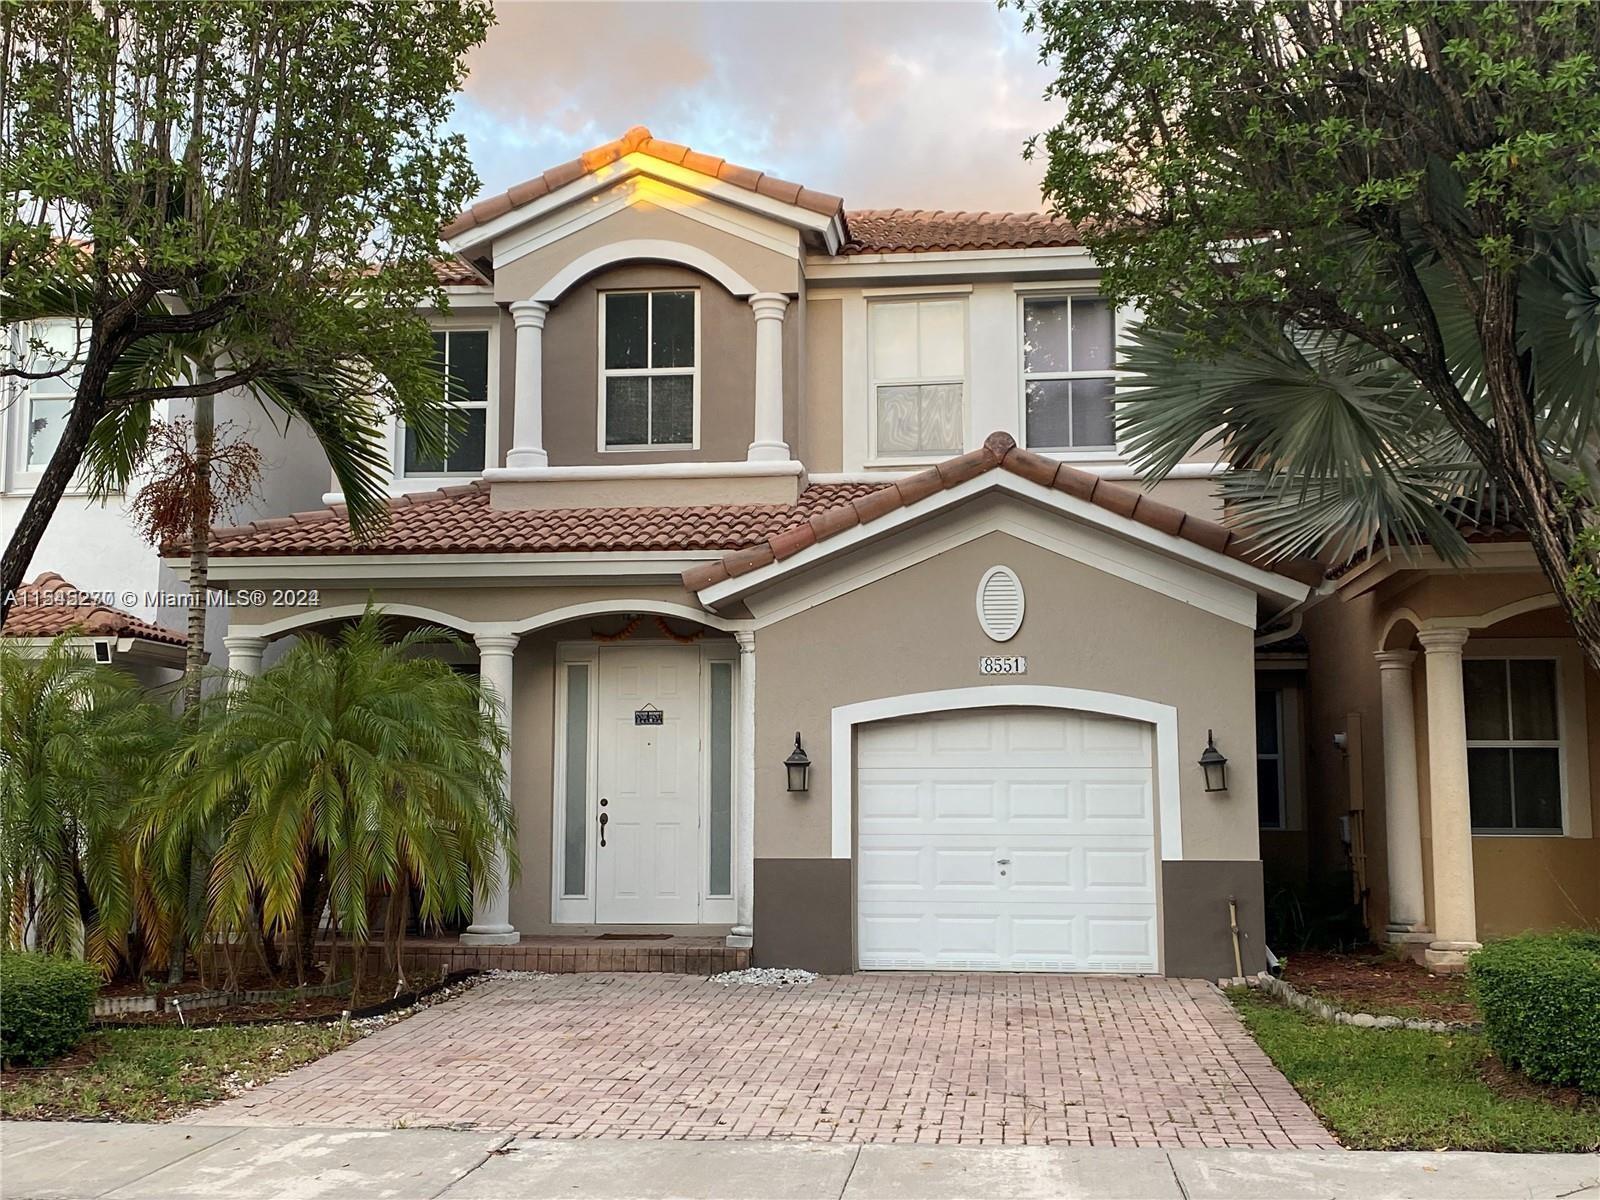 Photo of 8551 NW 108th Ct in Doral, FL